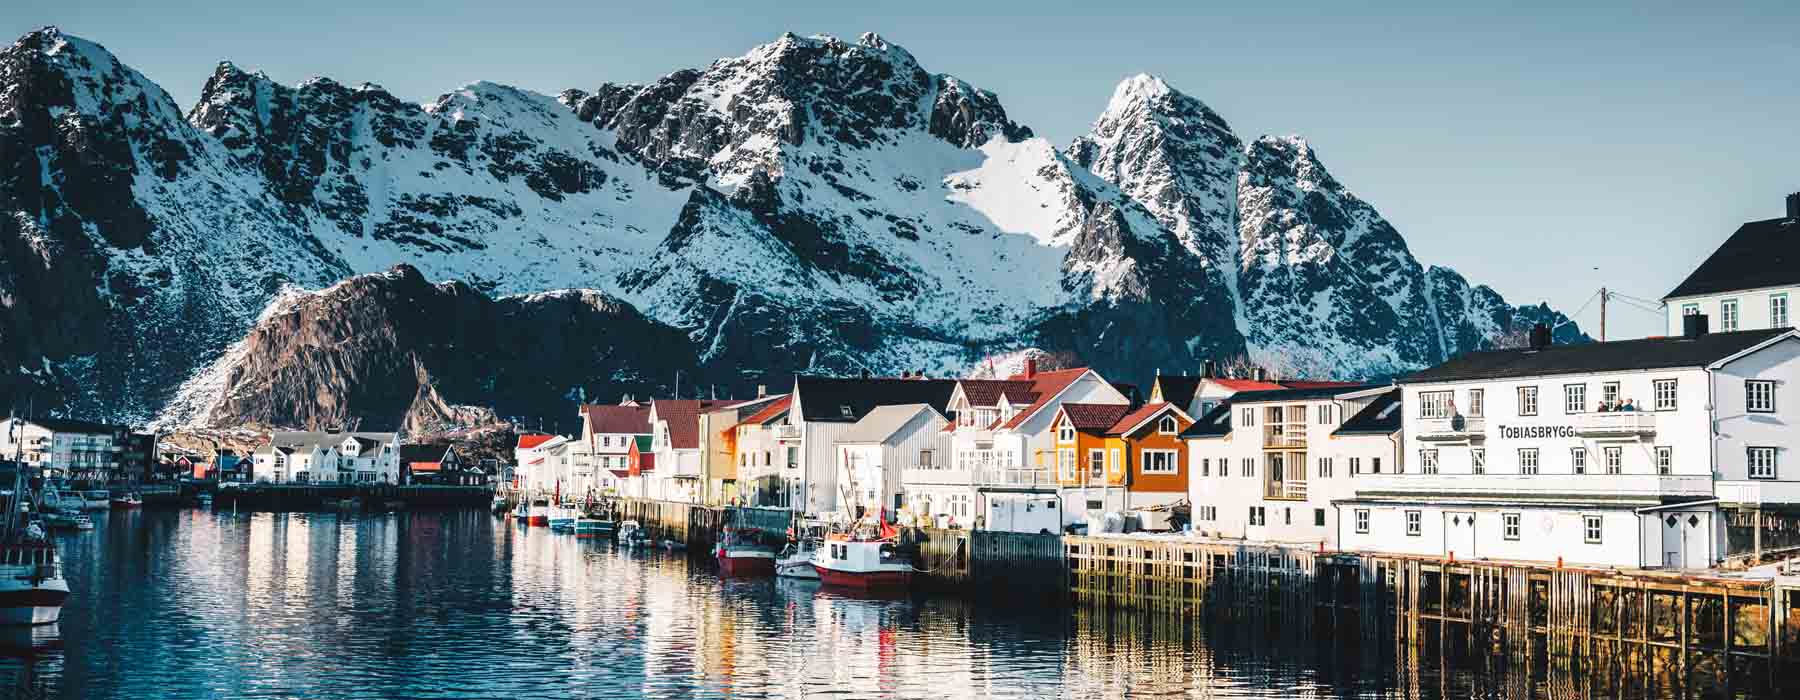 All our Norway Itinerary<br class="hidden-md hidden-lg" /> holidays